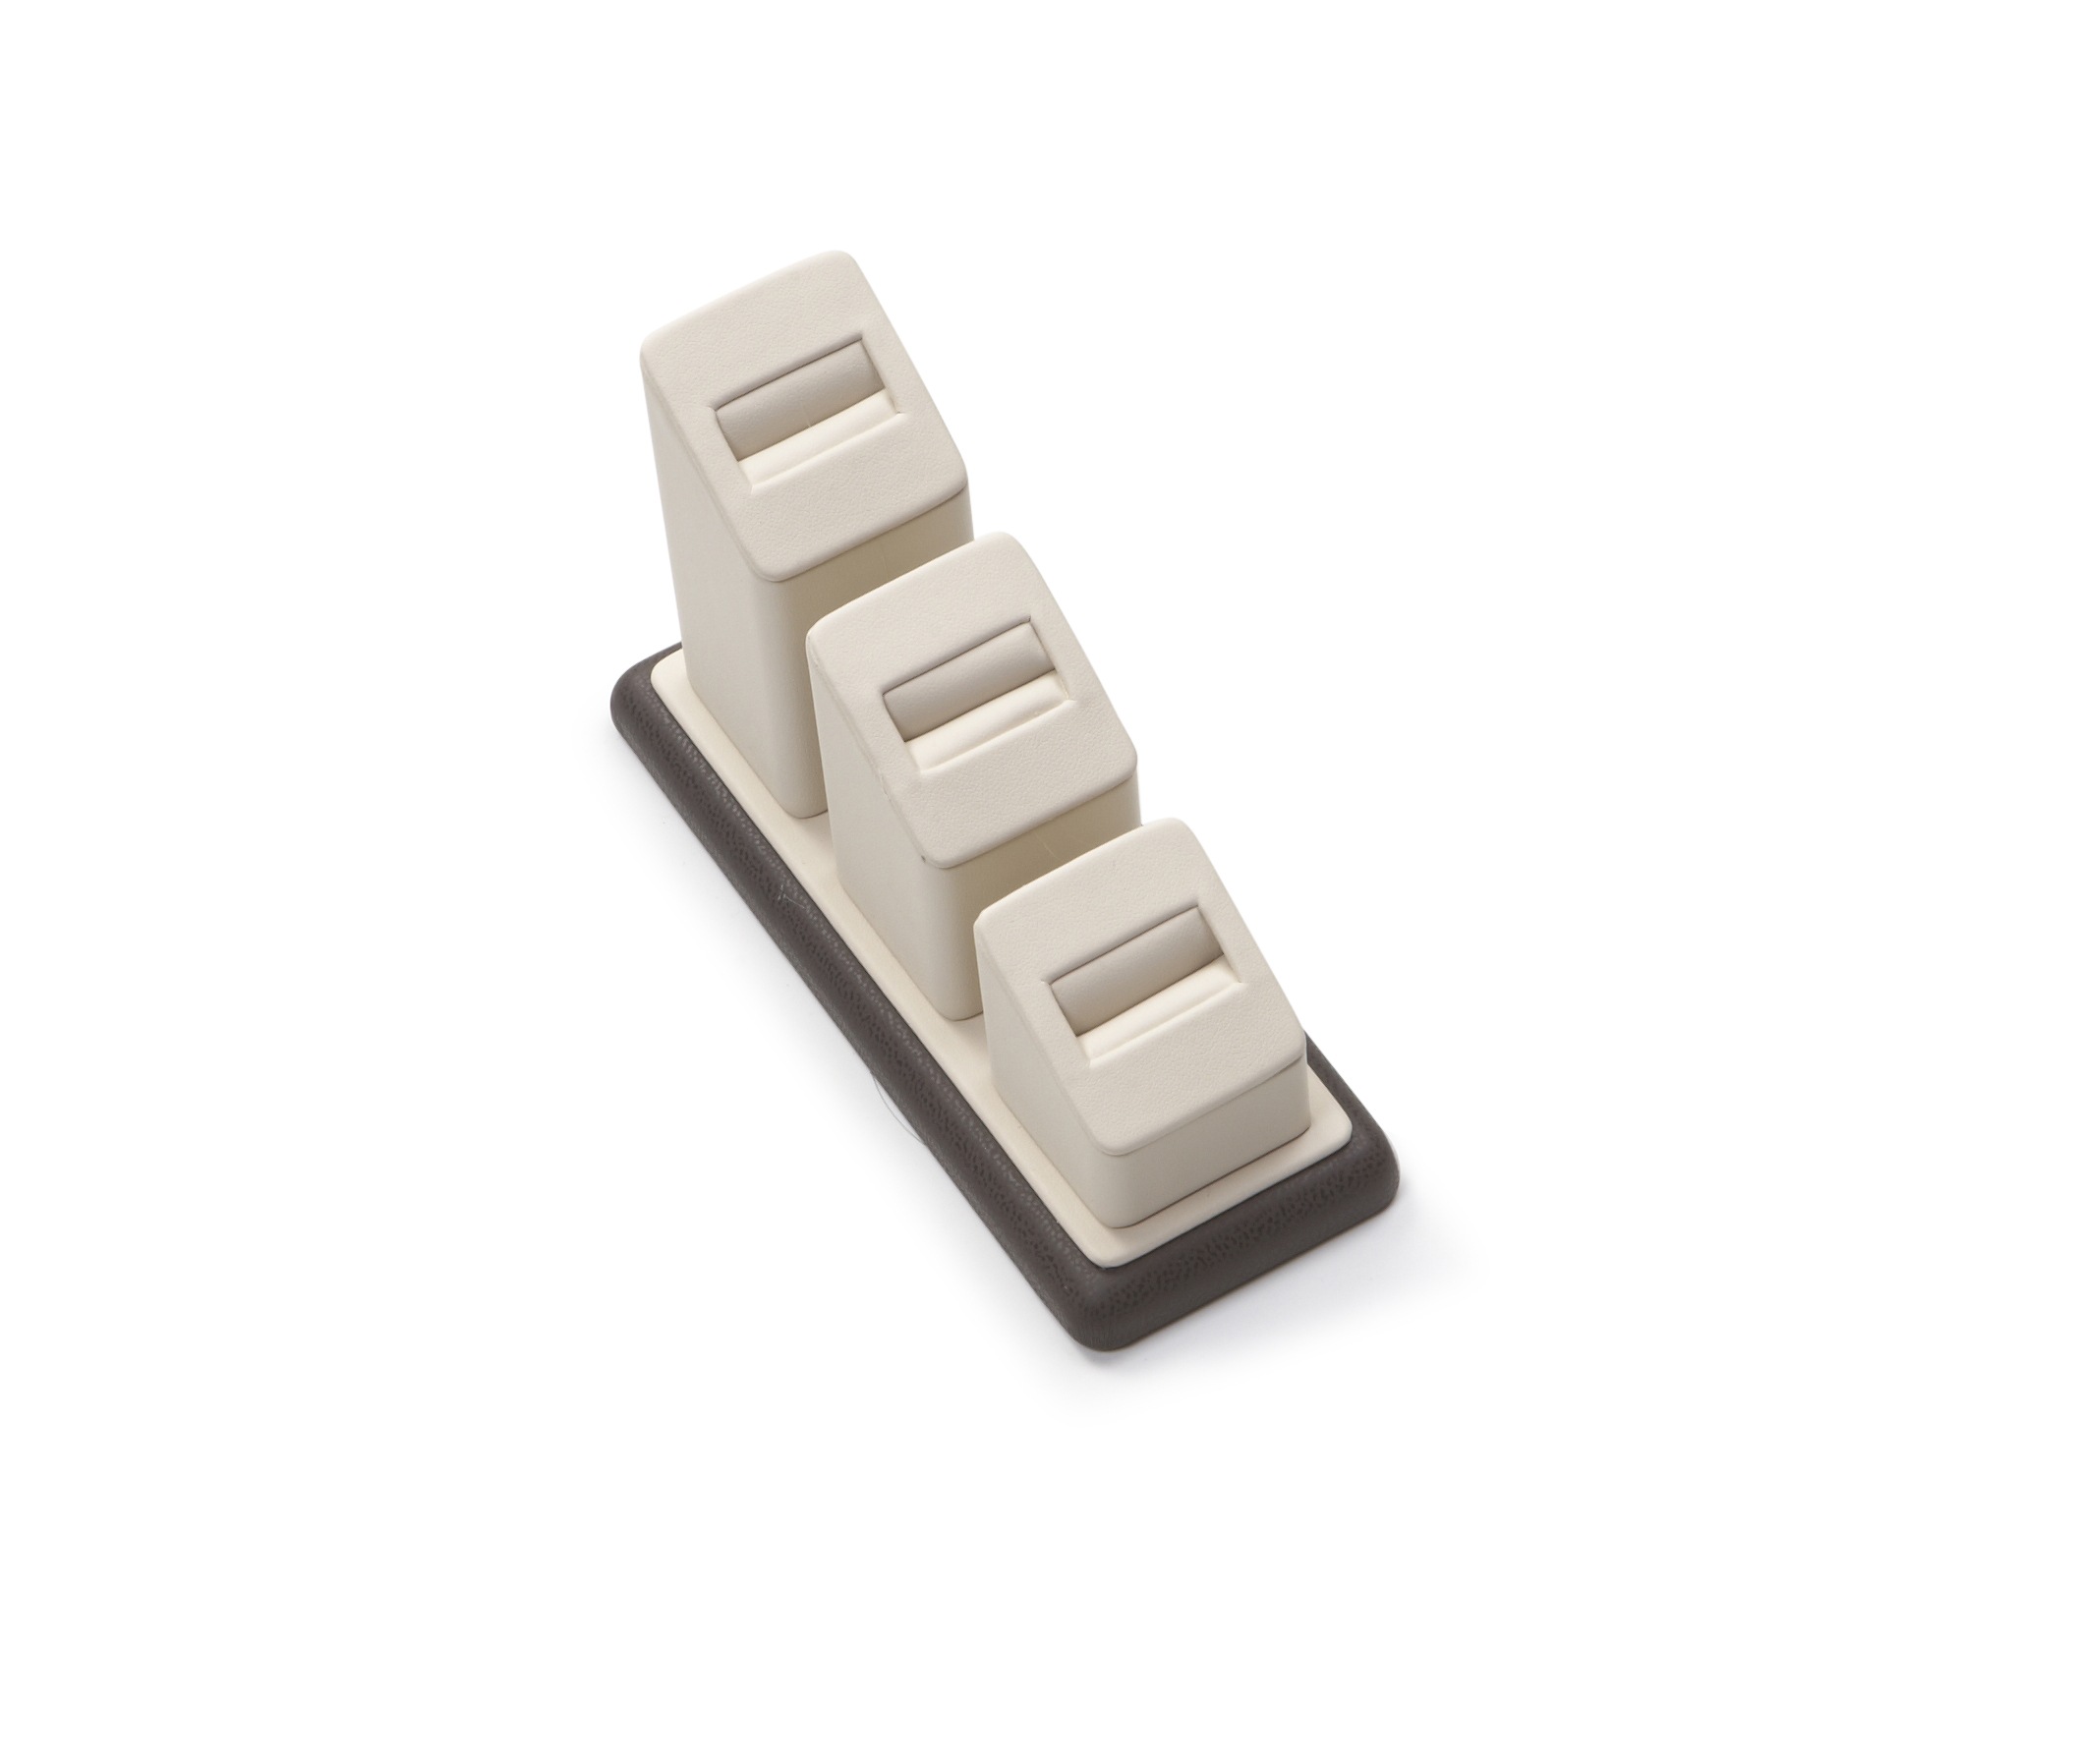 Chocolate/Beige Leatherette 3 Ring Slot Stand